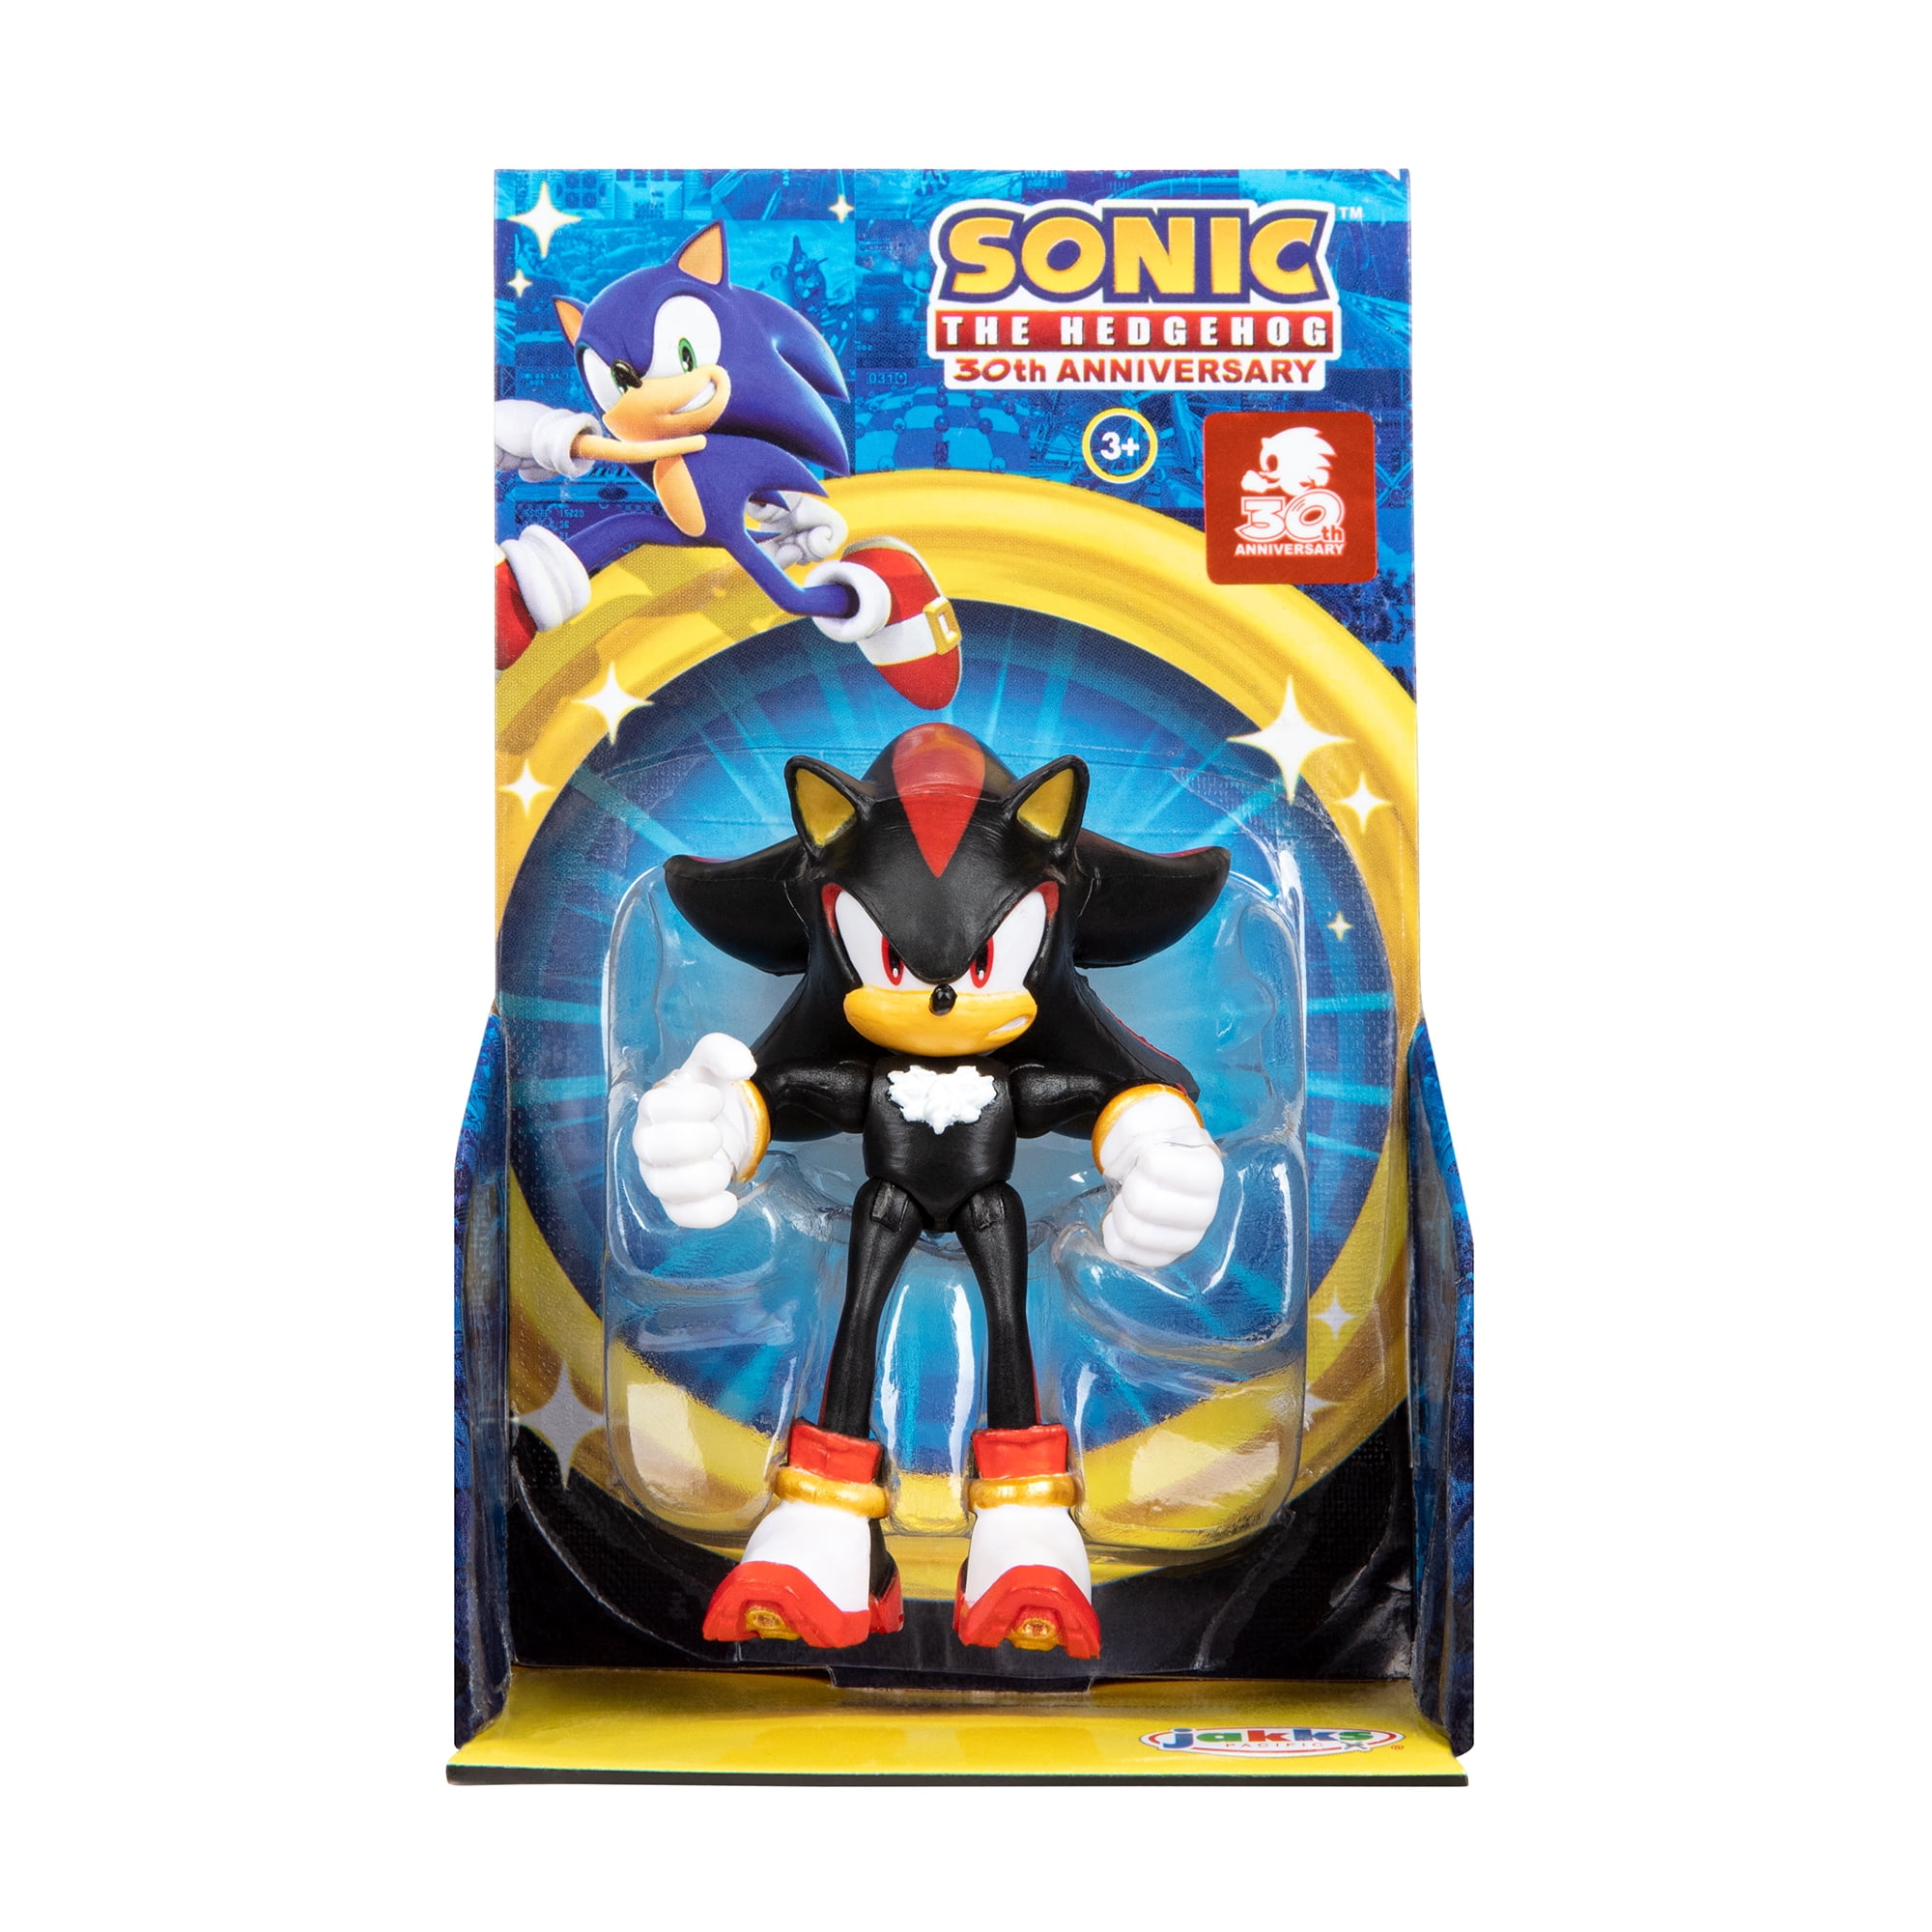 yea — Movie Shadow Concept - Sonic The Hedgehog I know